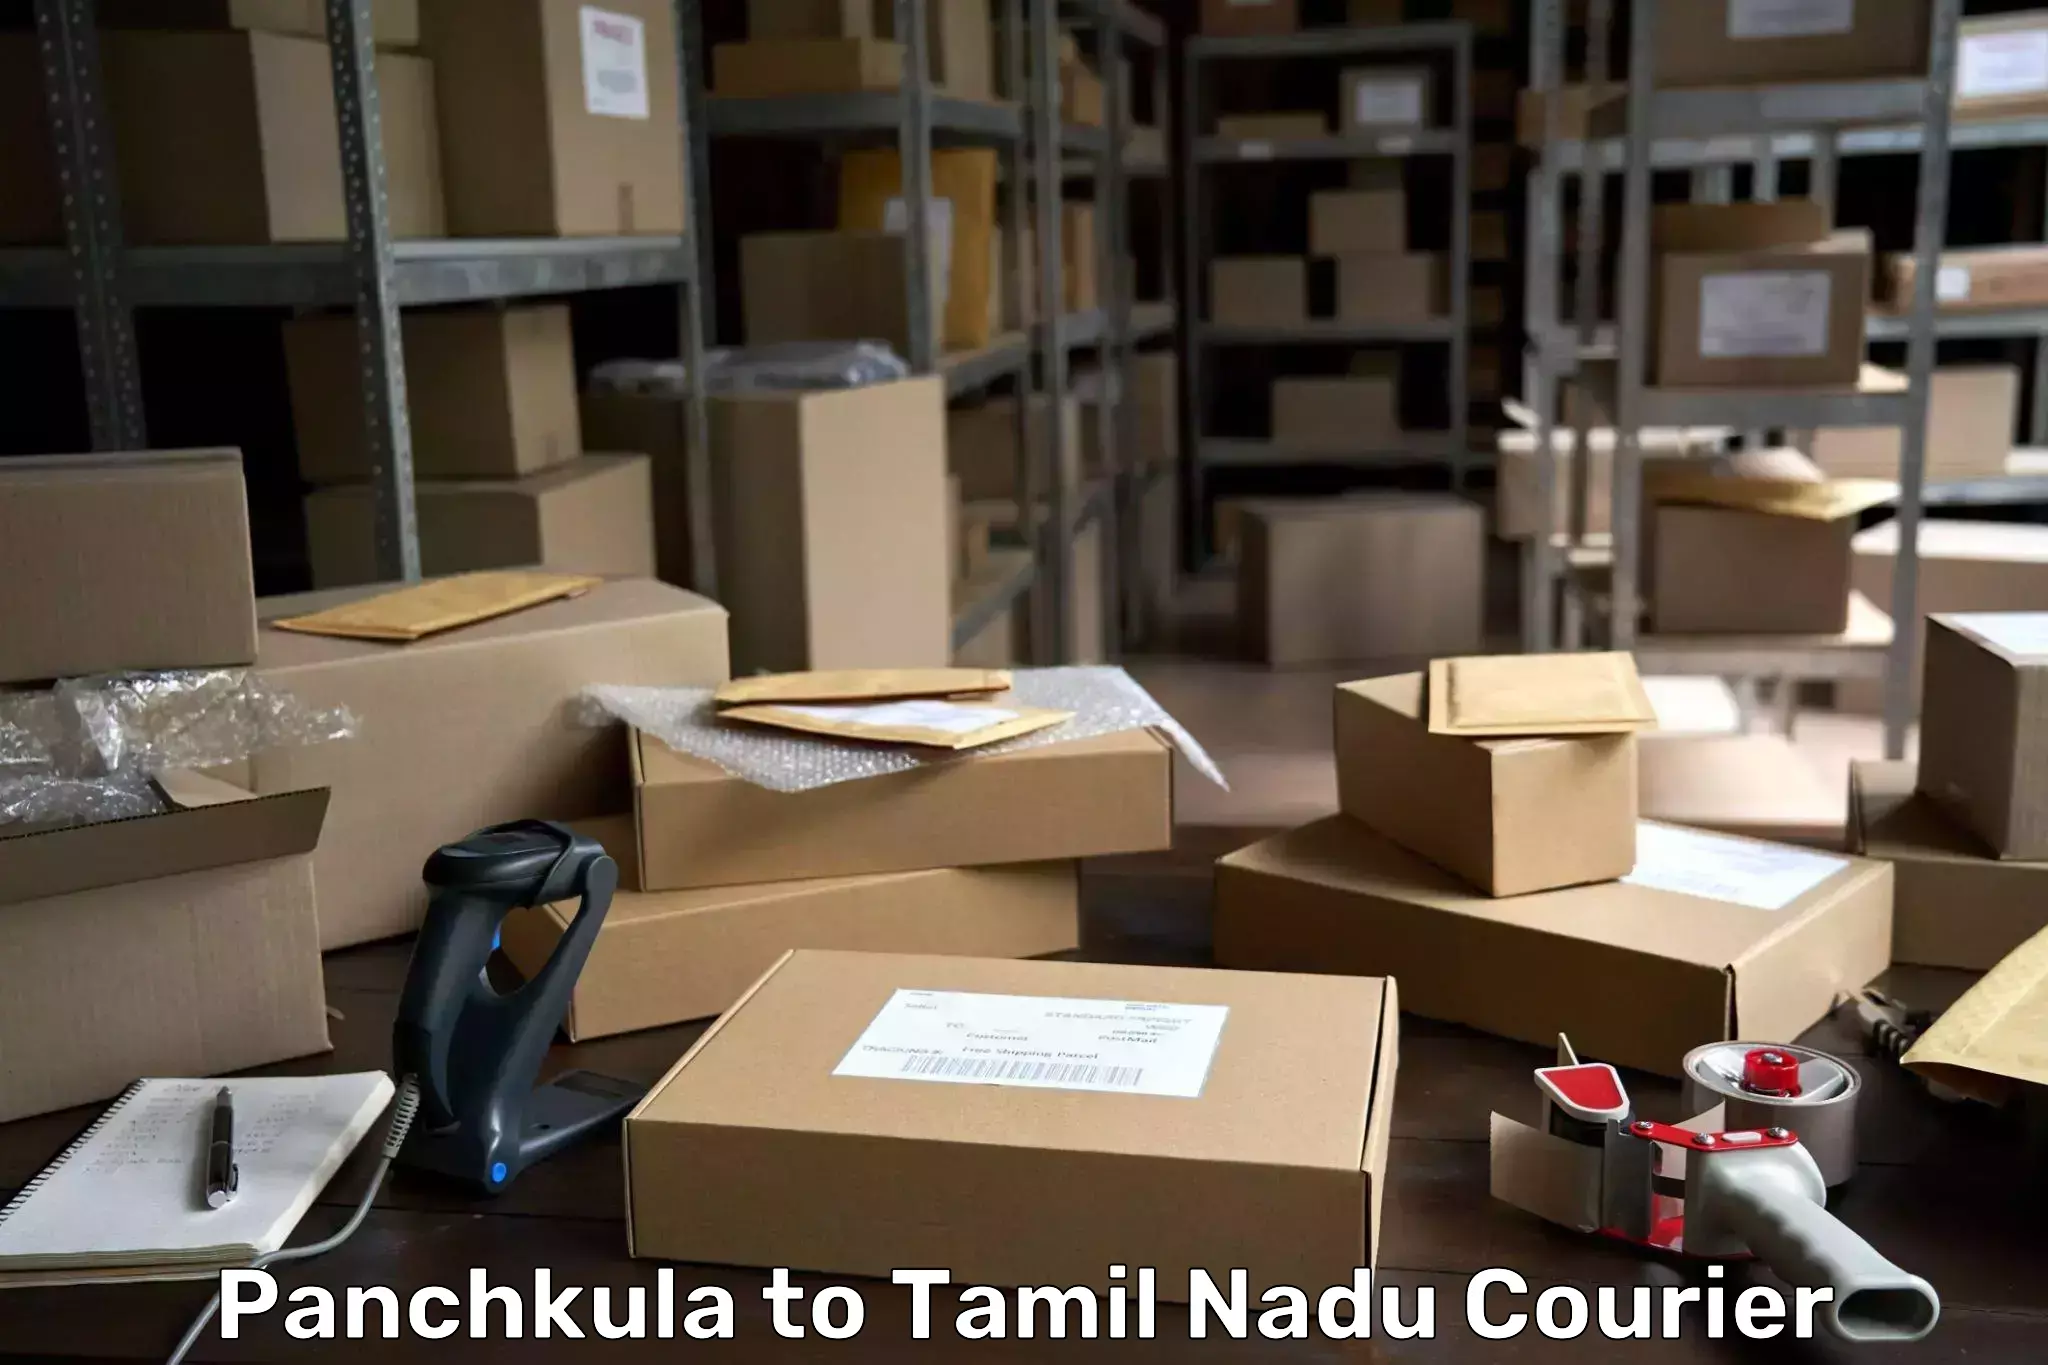 Local delivery service Panchkula to Tamil Nadu